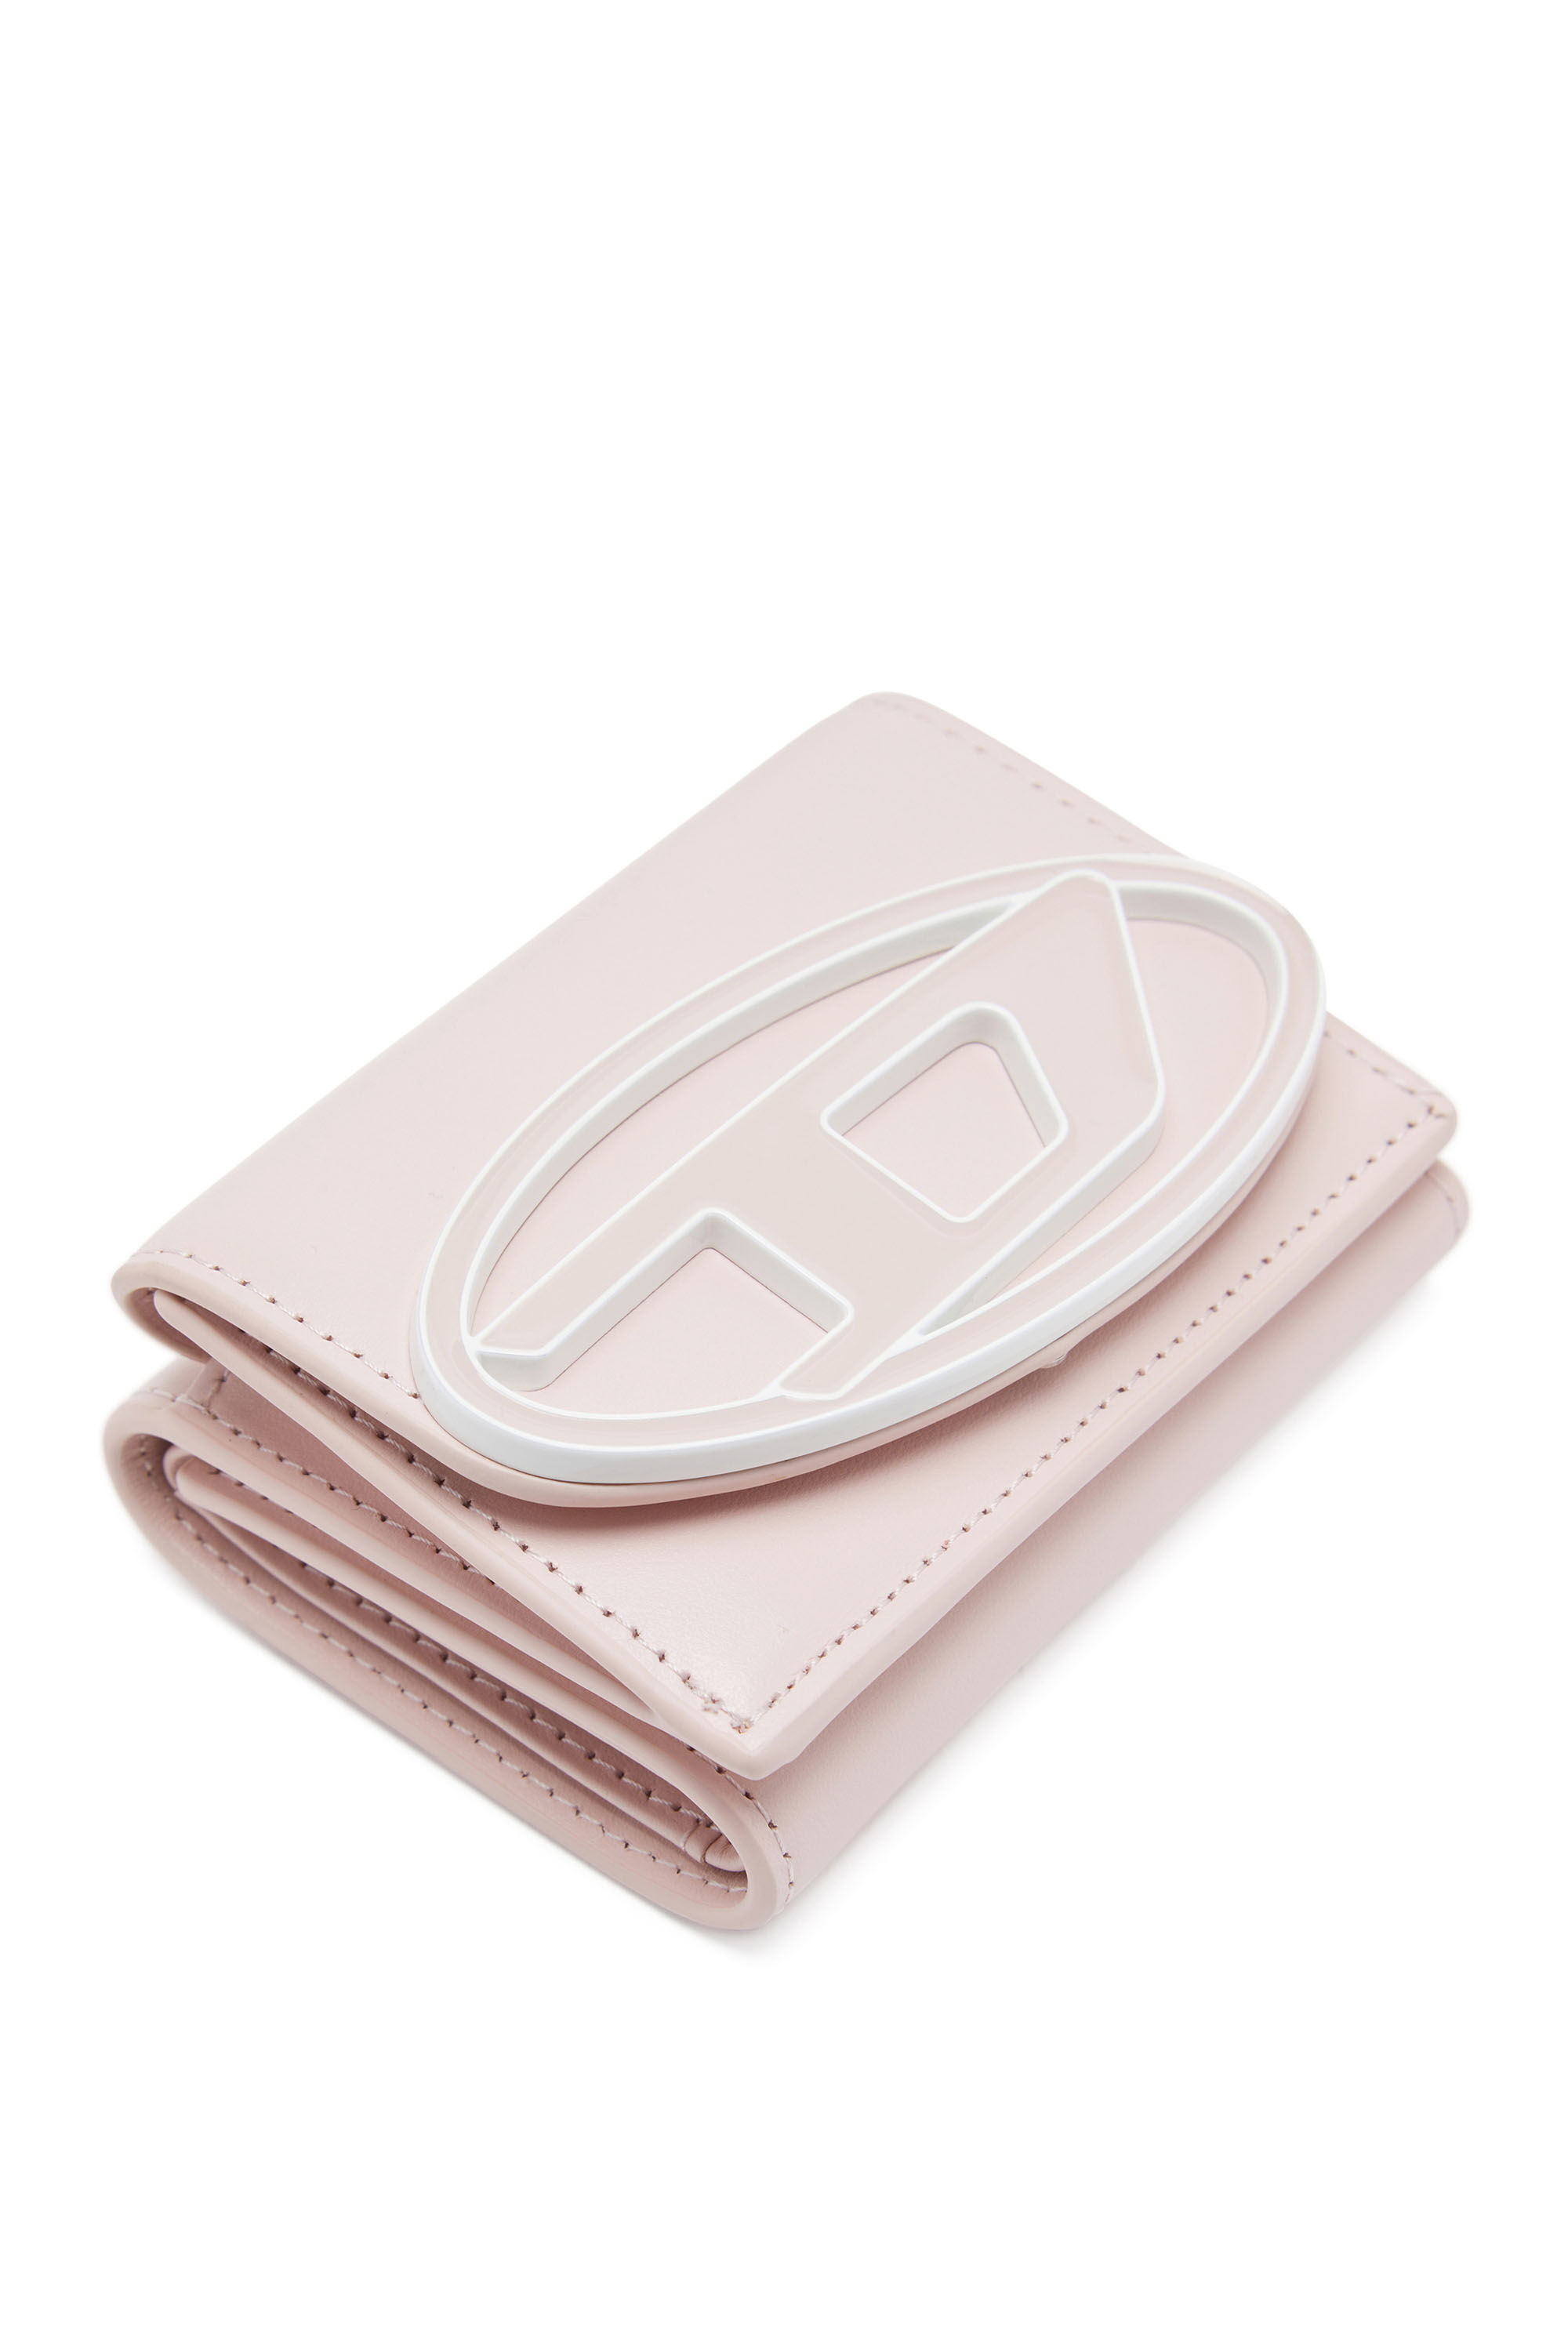 1DR TRI FOLD COIN XS II Tri-fold wallet in pastel leather｜ピンク